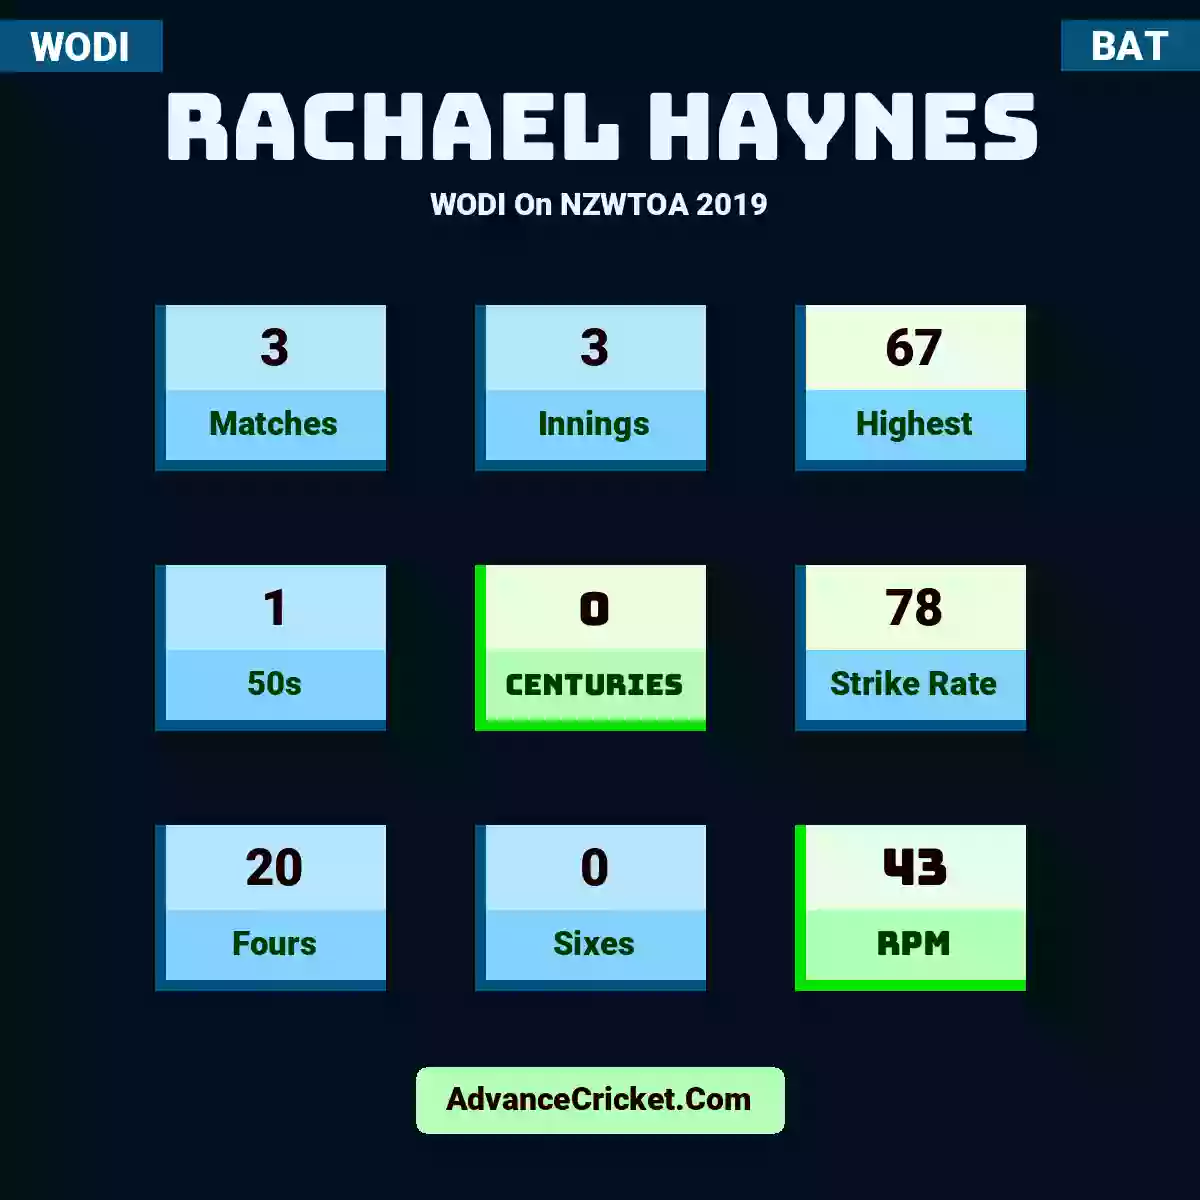 Rachael Haynes WODI  On NZWTOA 2019, Rachael Haynes played 3 matches, scored 67 runs as highest, 1 half-centuries, and 0 centuries, with a strike rate of 78. R.Haynes hit 20 fours and 0 sixes, with an RPM of 43.